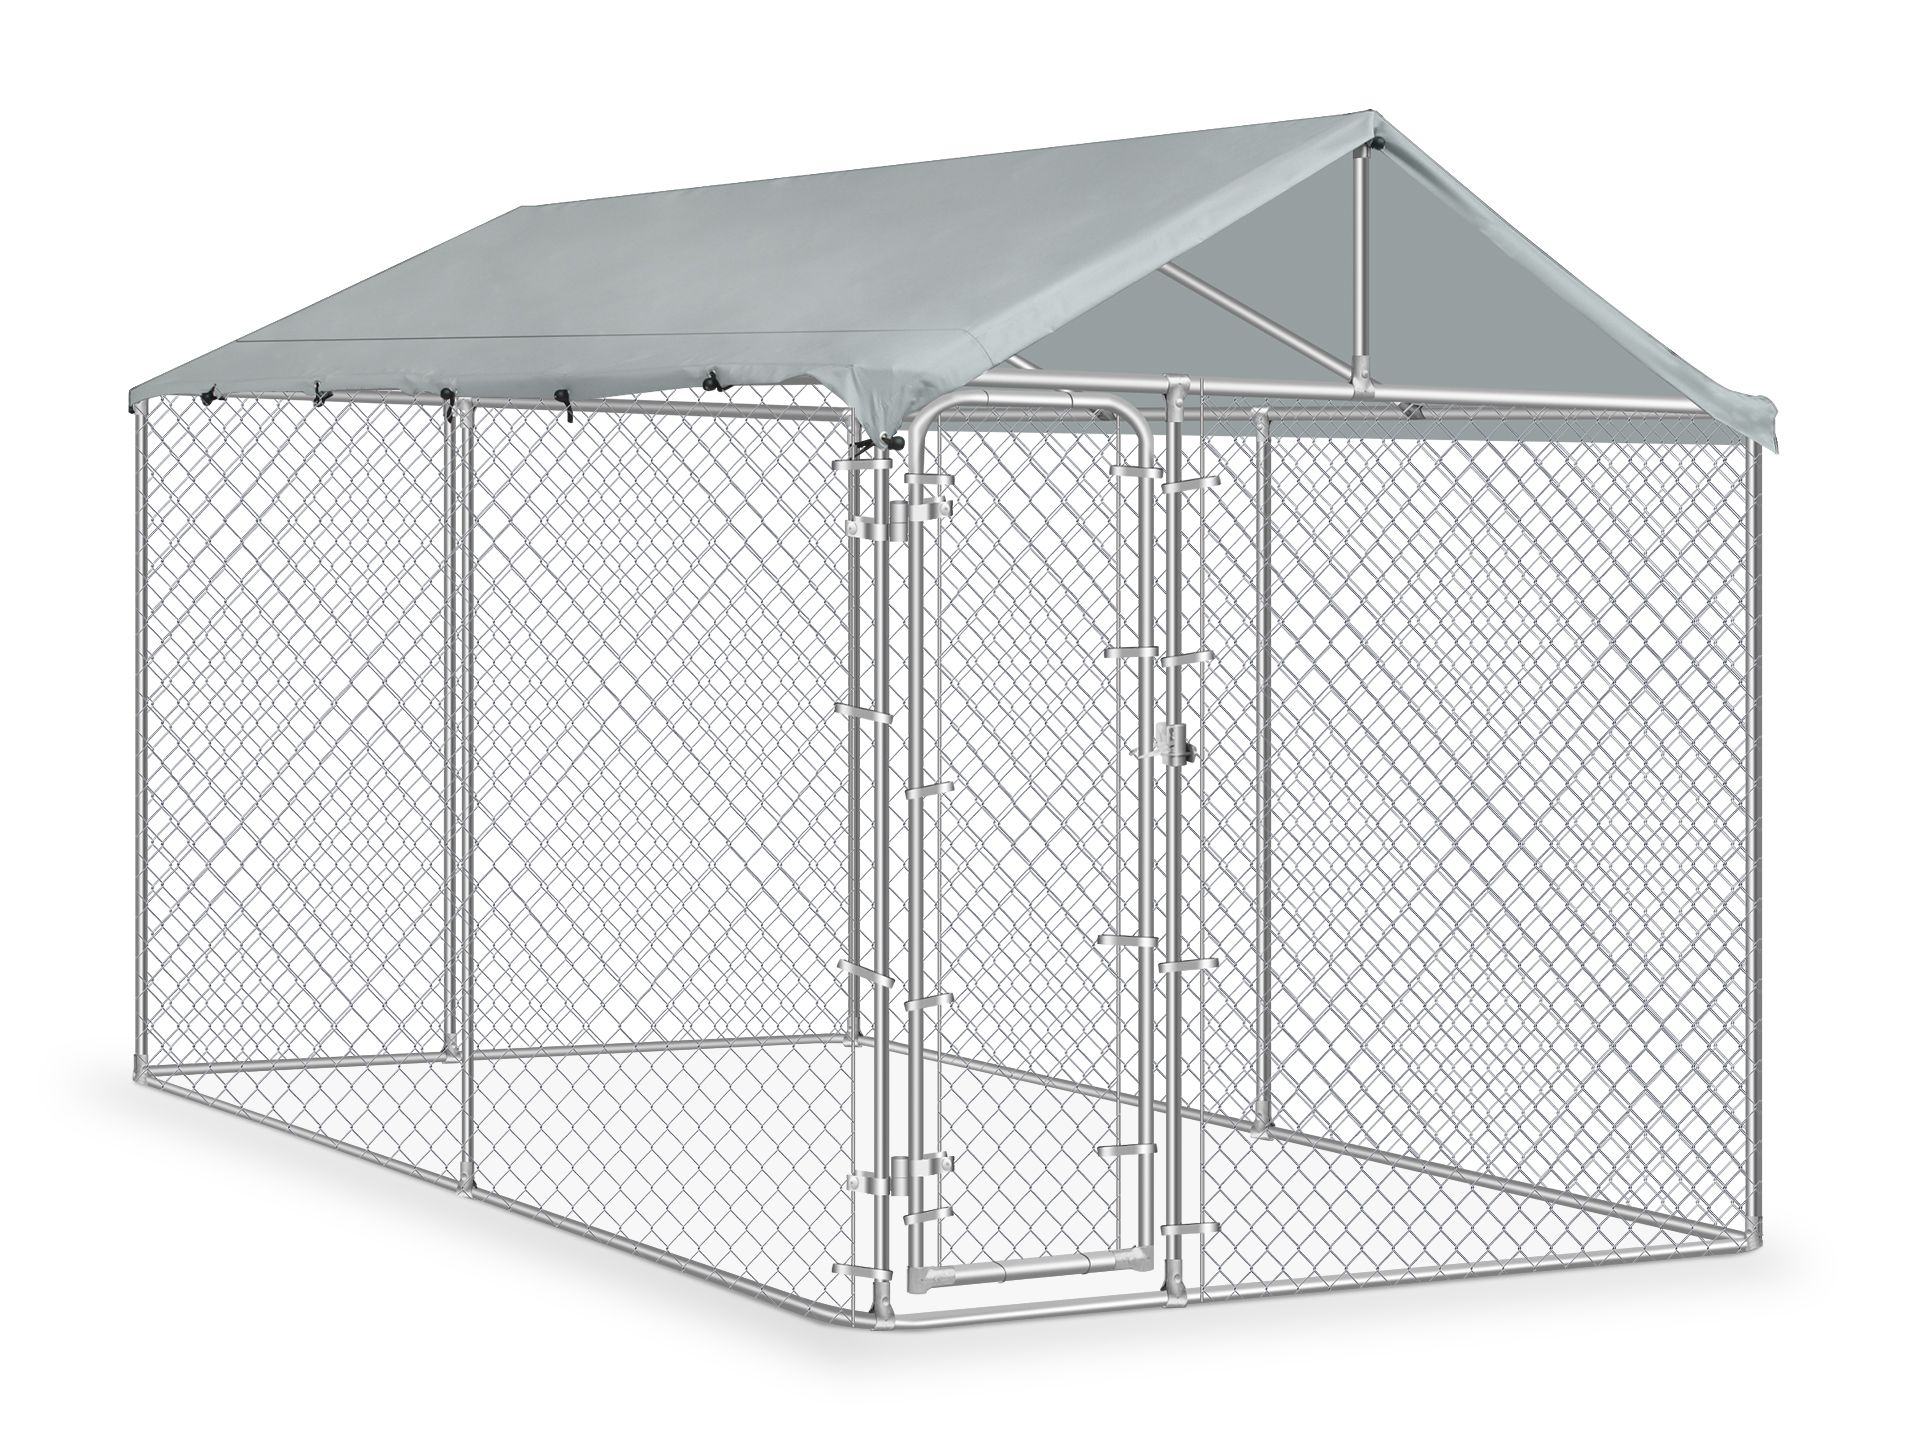 Bingo Dog Kennel and Run 4x2.3x1.83m with Roof